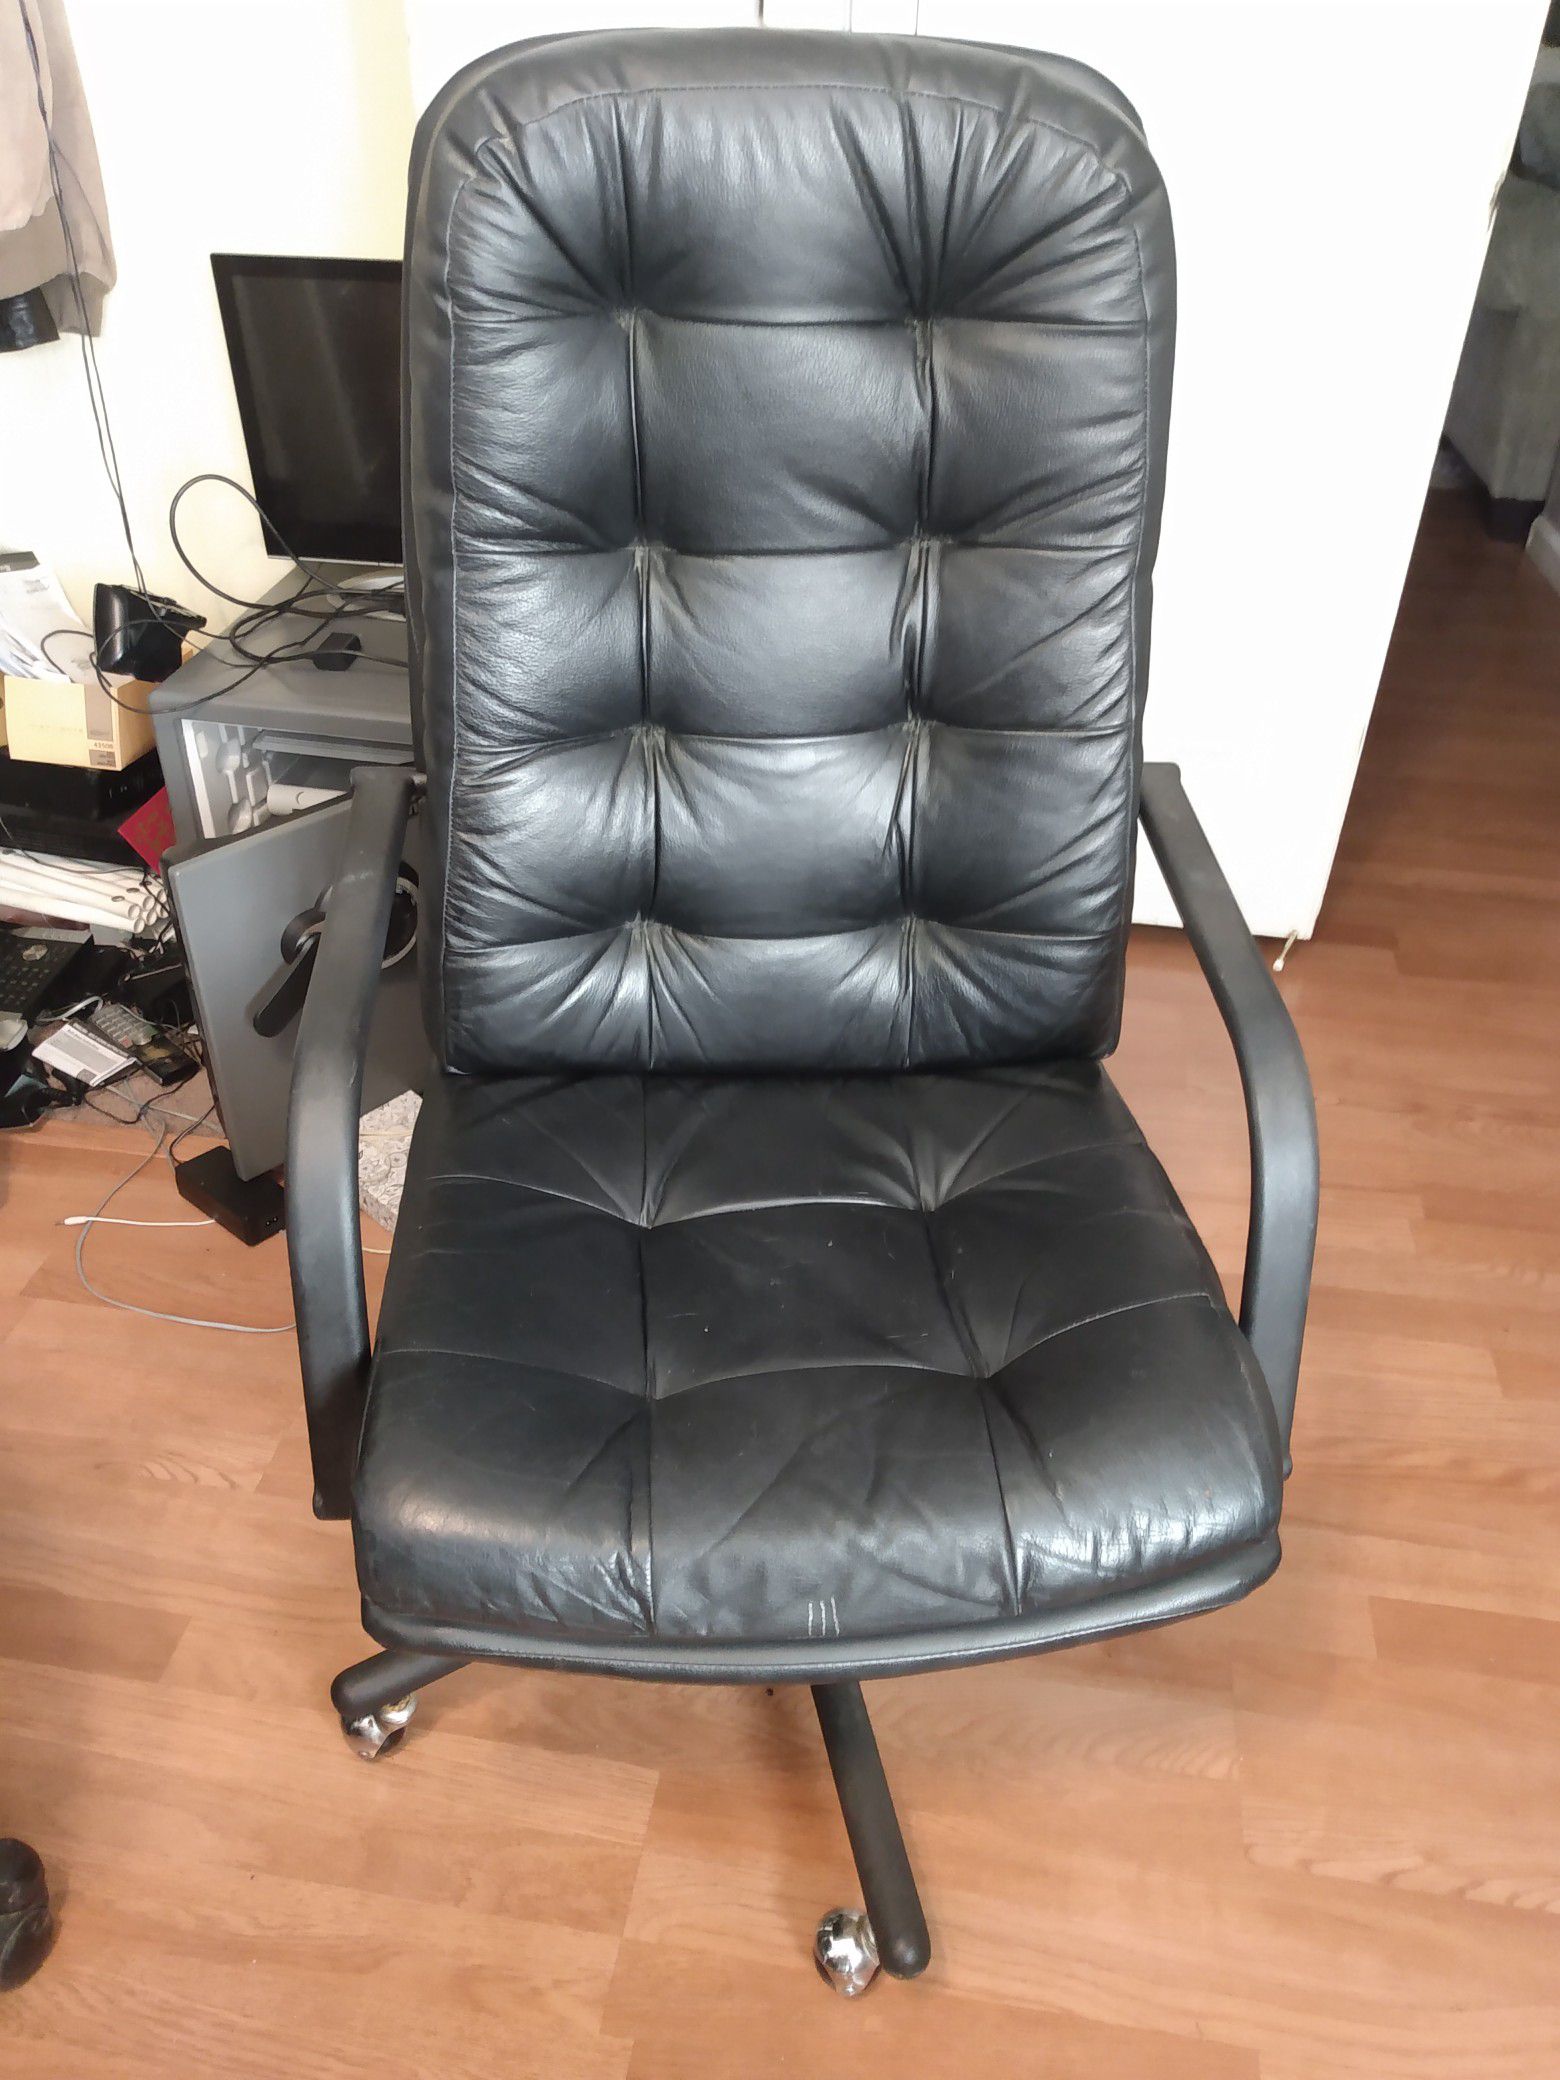 Leather office chair 45 no rips no tears